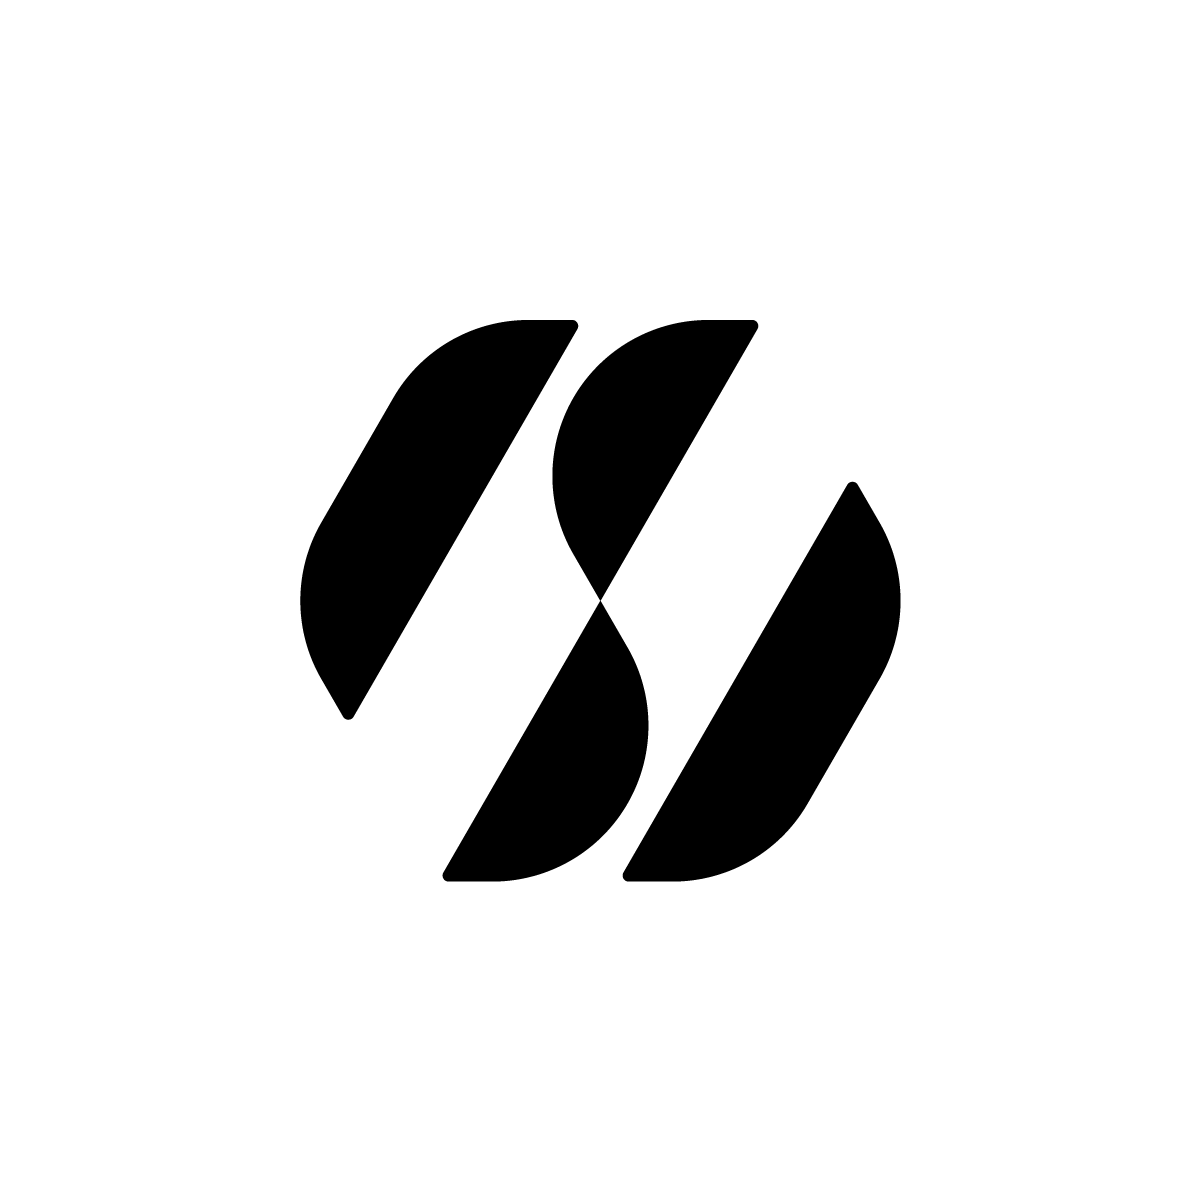 Minimalist Abstract S Logo featuring dynamic intersecting shapes in black, symbolizing progress and connectivity.